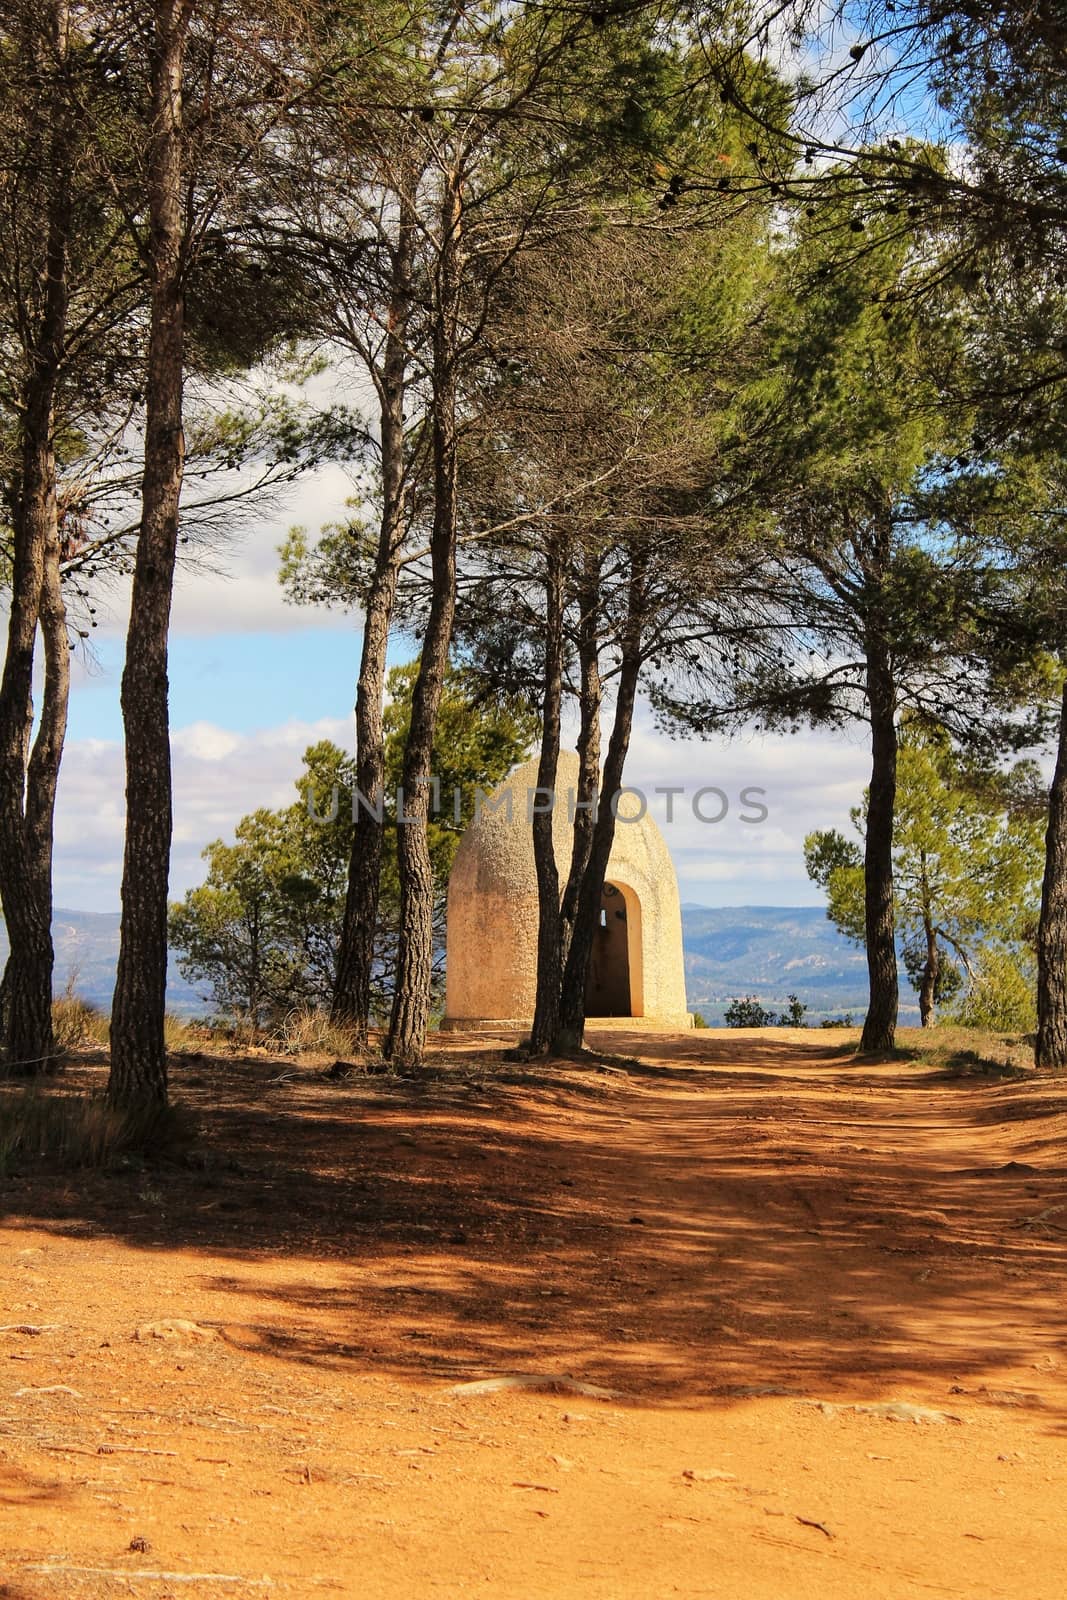 Tower between pine forest in the Utiel mountains by soniabonet